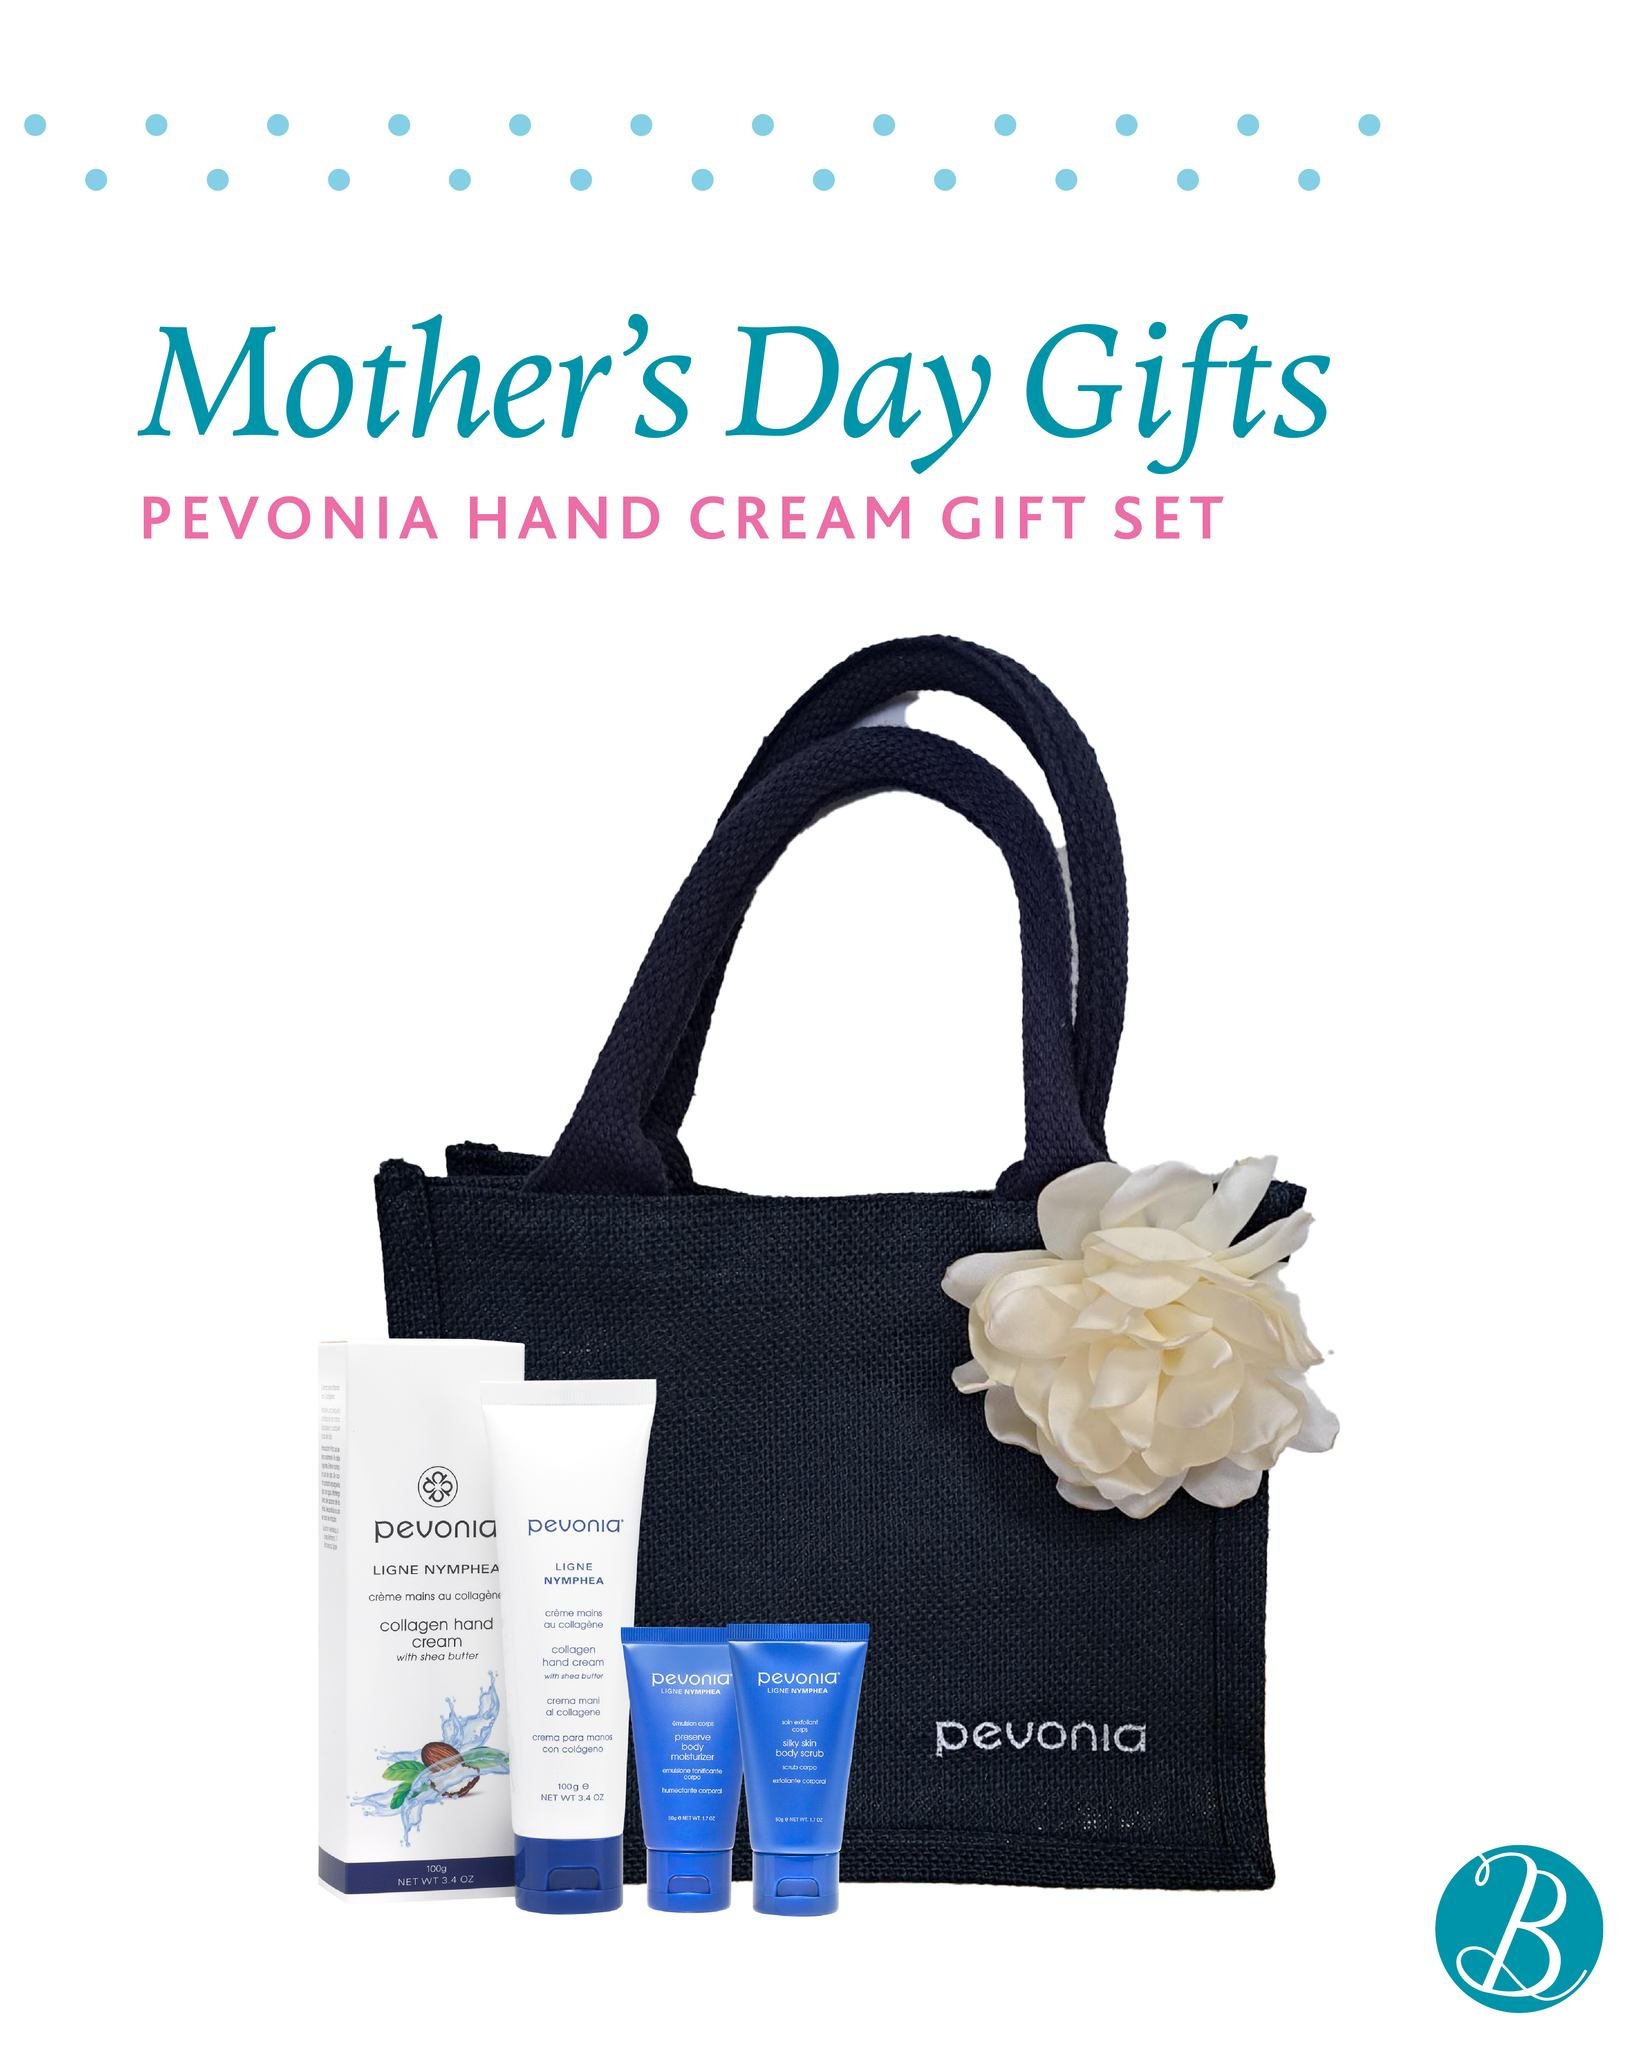 Mother&rsquo;s Day Gifts

With every Pevonia Hand Cream purchased we are giving away a Pevonia Silky Skin Body Scrub 30ml and Pevonia Preserve Body Moisturiser 30ml in a natural fibre reusable gift bag (priced at &pound;43.10). Purchase in salon only